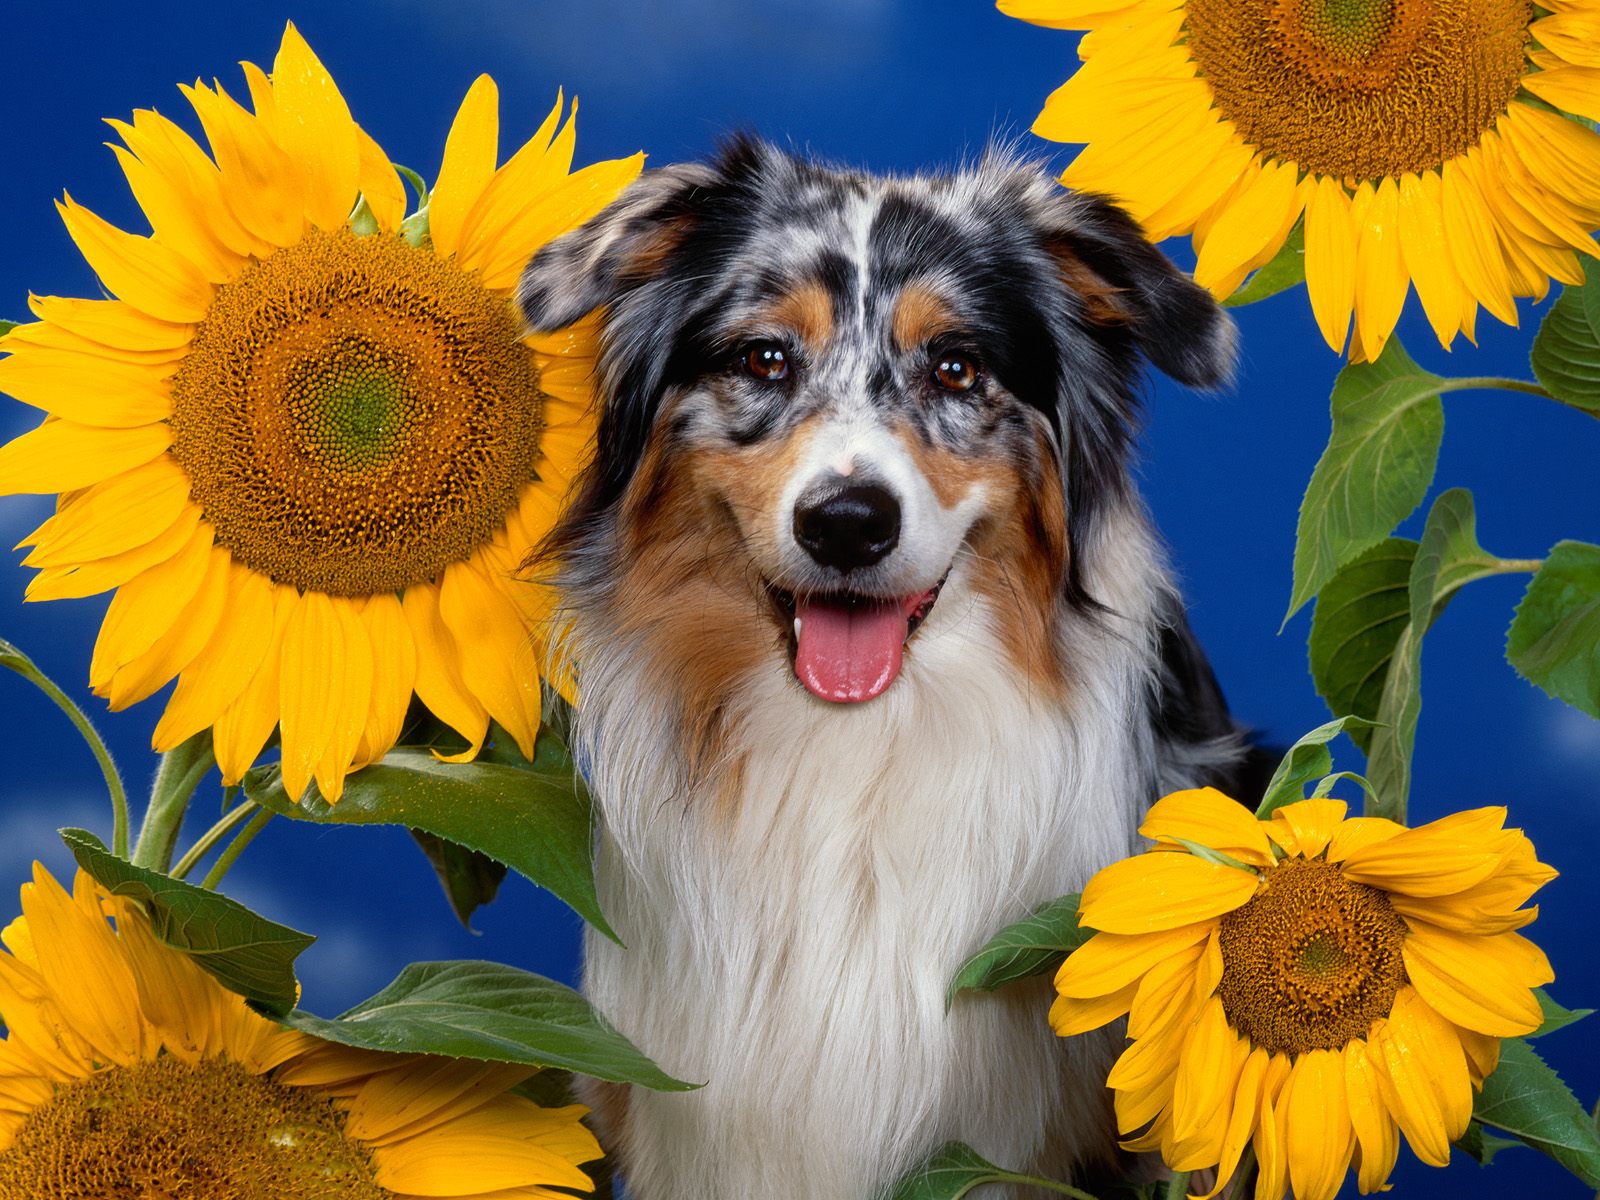 Australian Shepherd Wallpapers, Photos, Pictures and Backgrounds